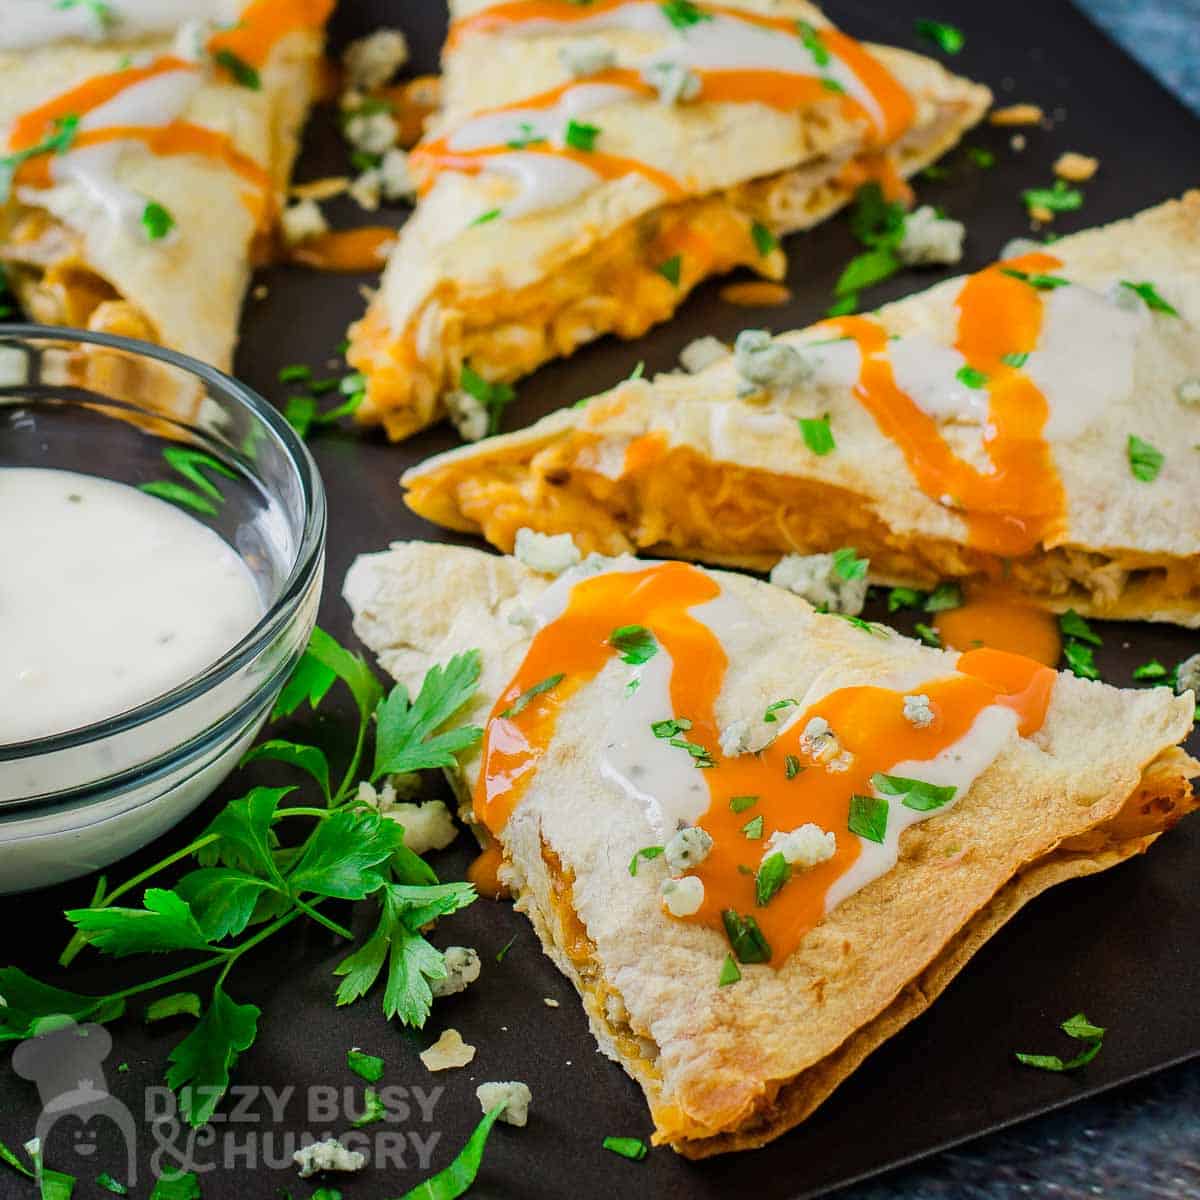 Side angled shot of a cut quesadilla drizzled with buffalo sauce and blue cheese garnished with herbs on a black plate with a side of ranch in a white bowl.